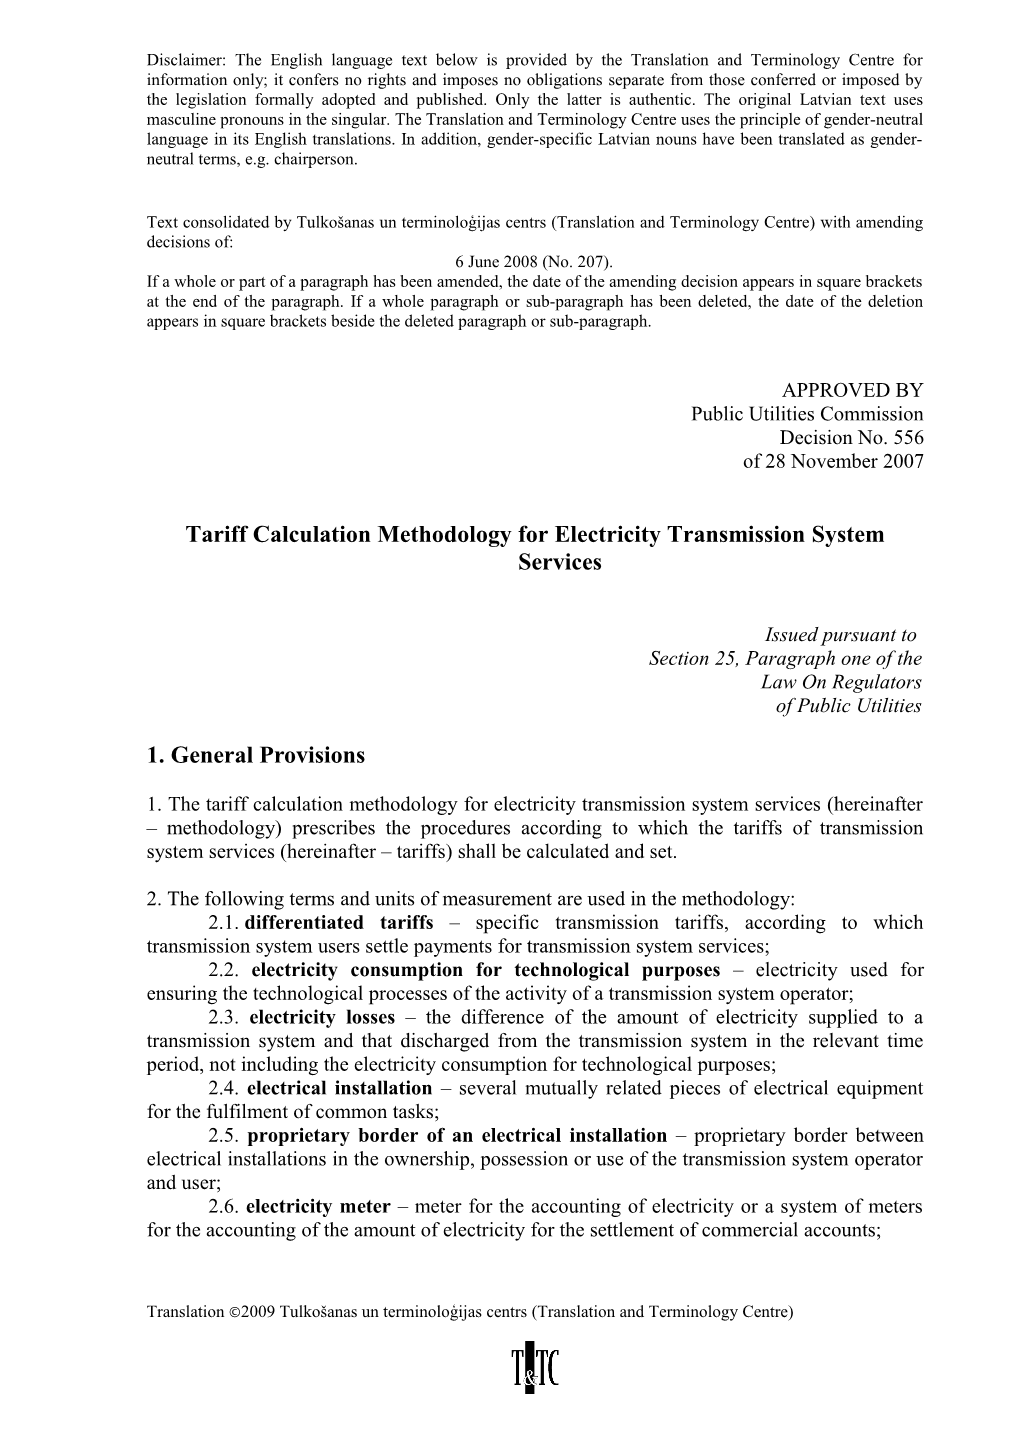 Tariff Calculation Methodology for Electricity Transmission System Services